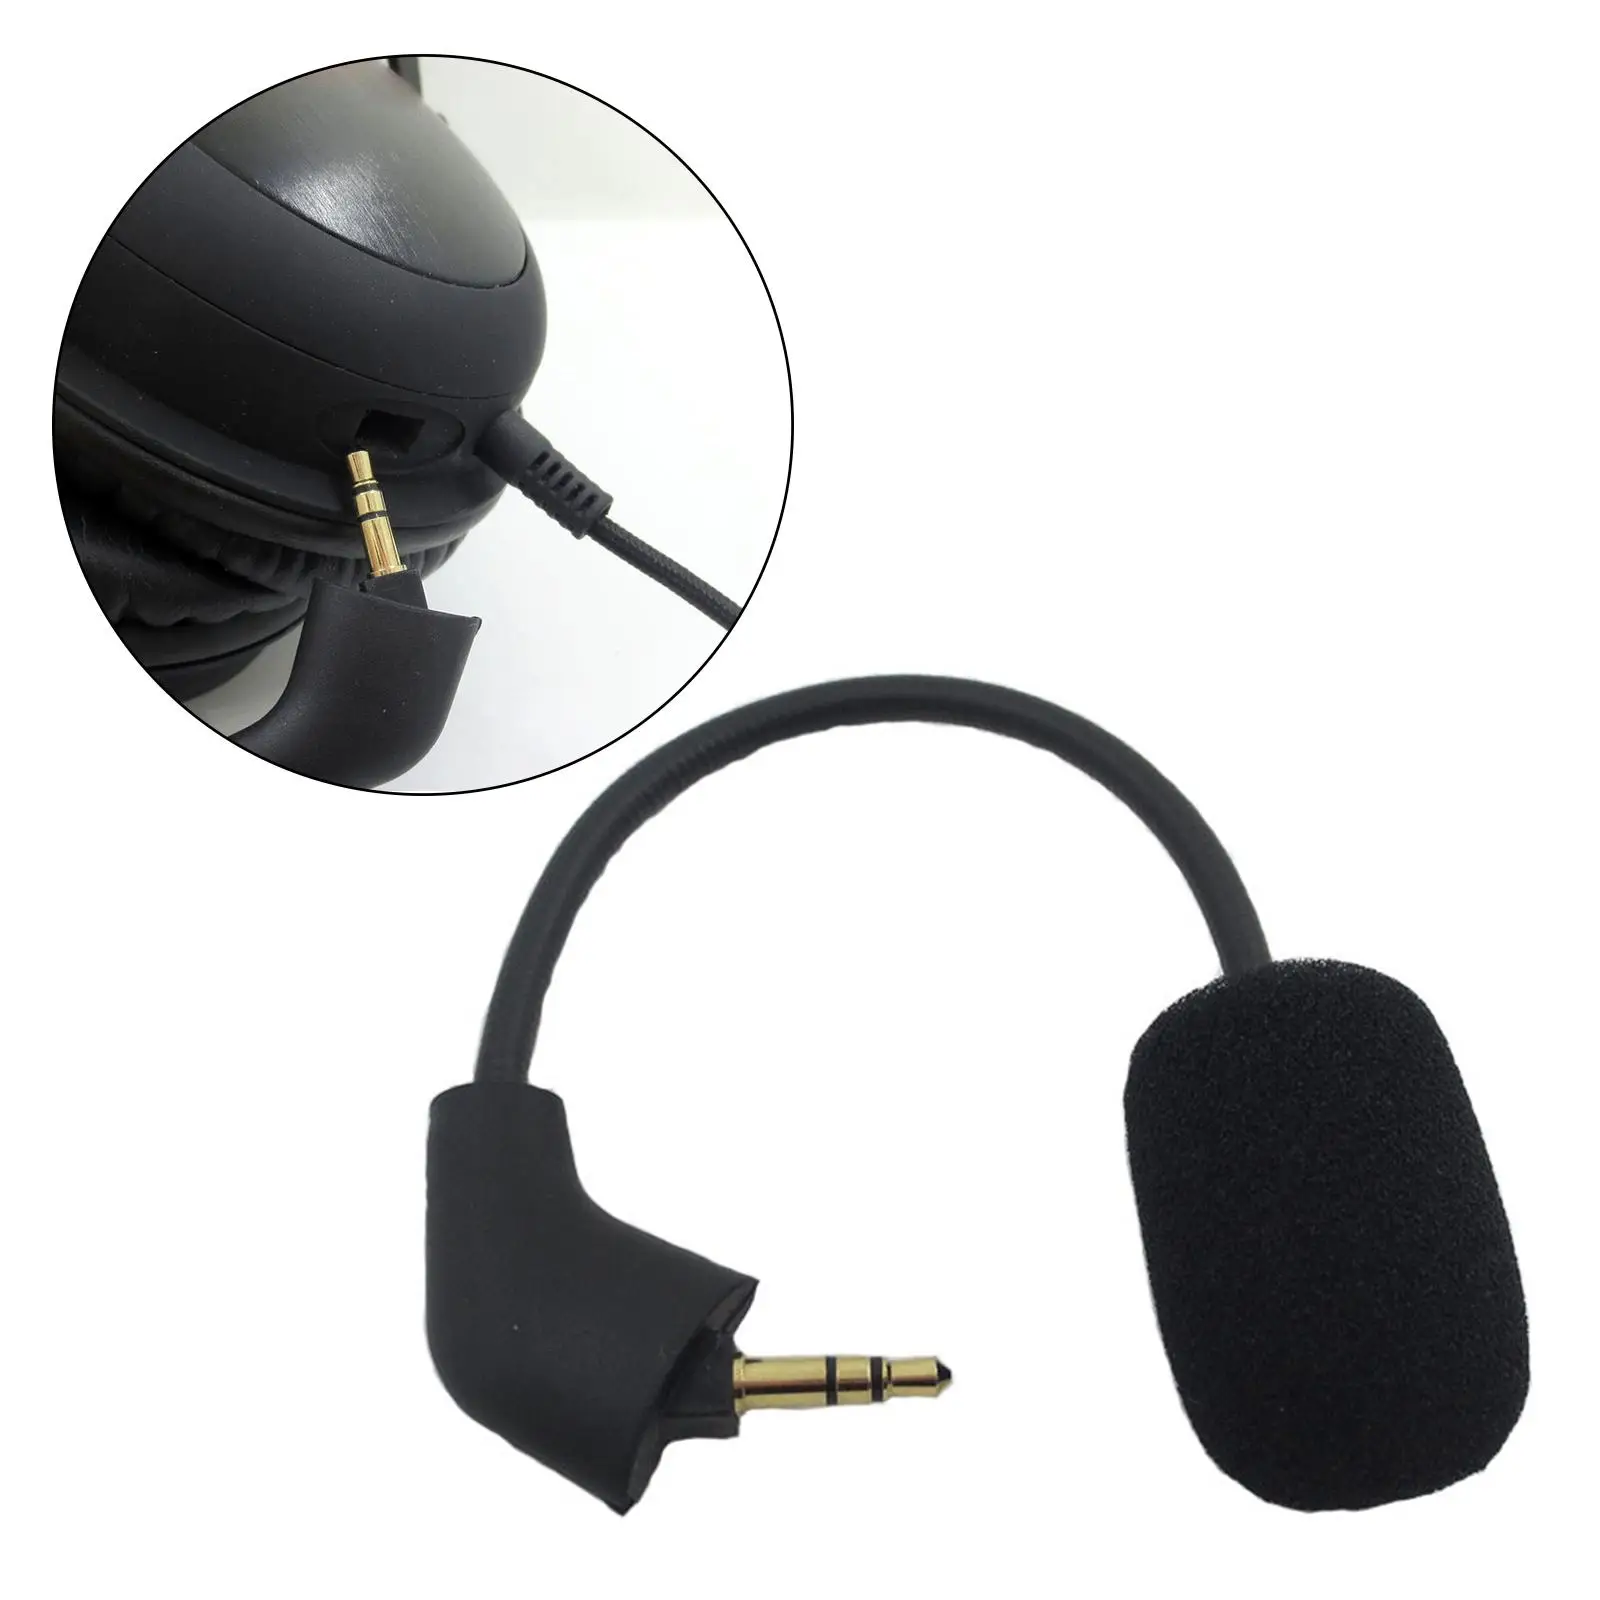  Replacement Detachable Gaming Headset 17cm Length with Foam Cover Bendable - Copper Plug  Tomahawk